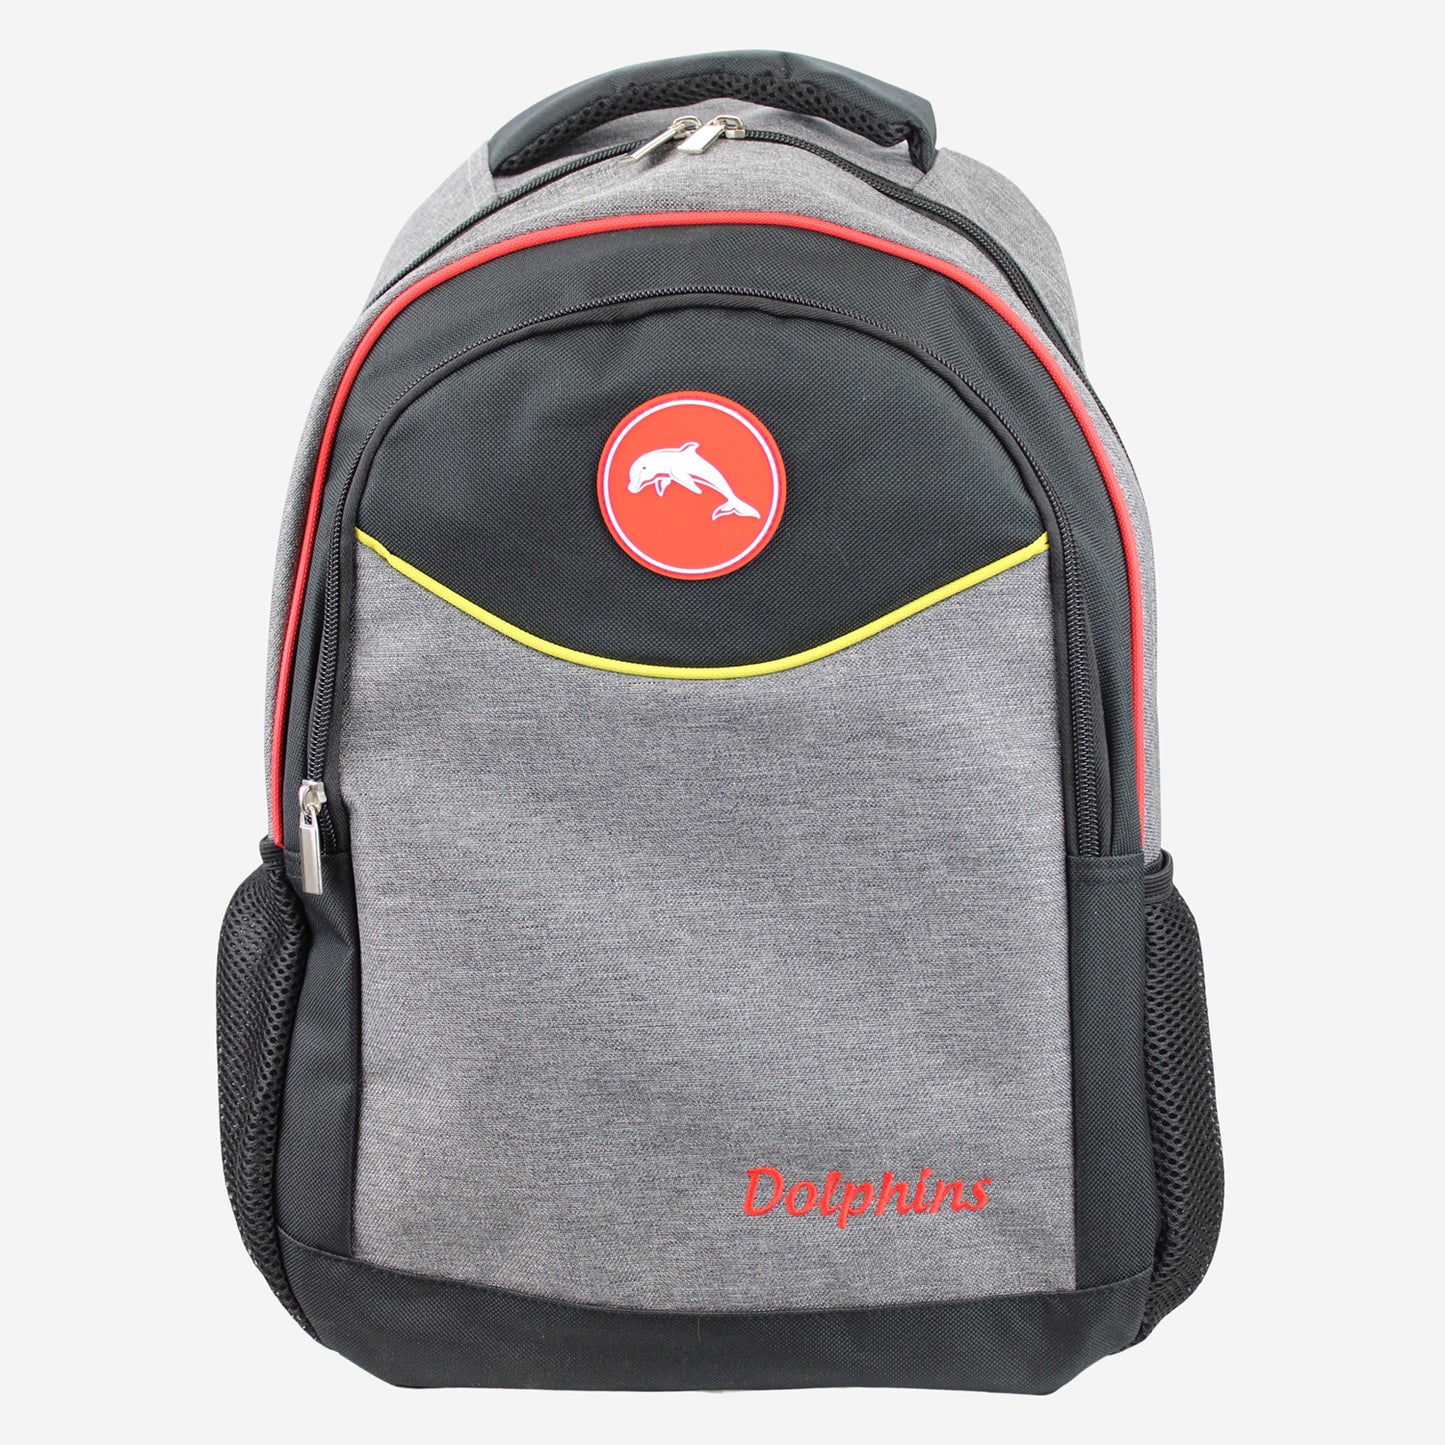 Dolphins Stealth Backpack